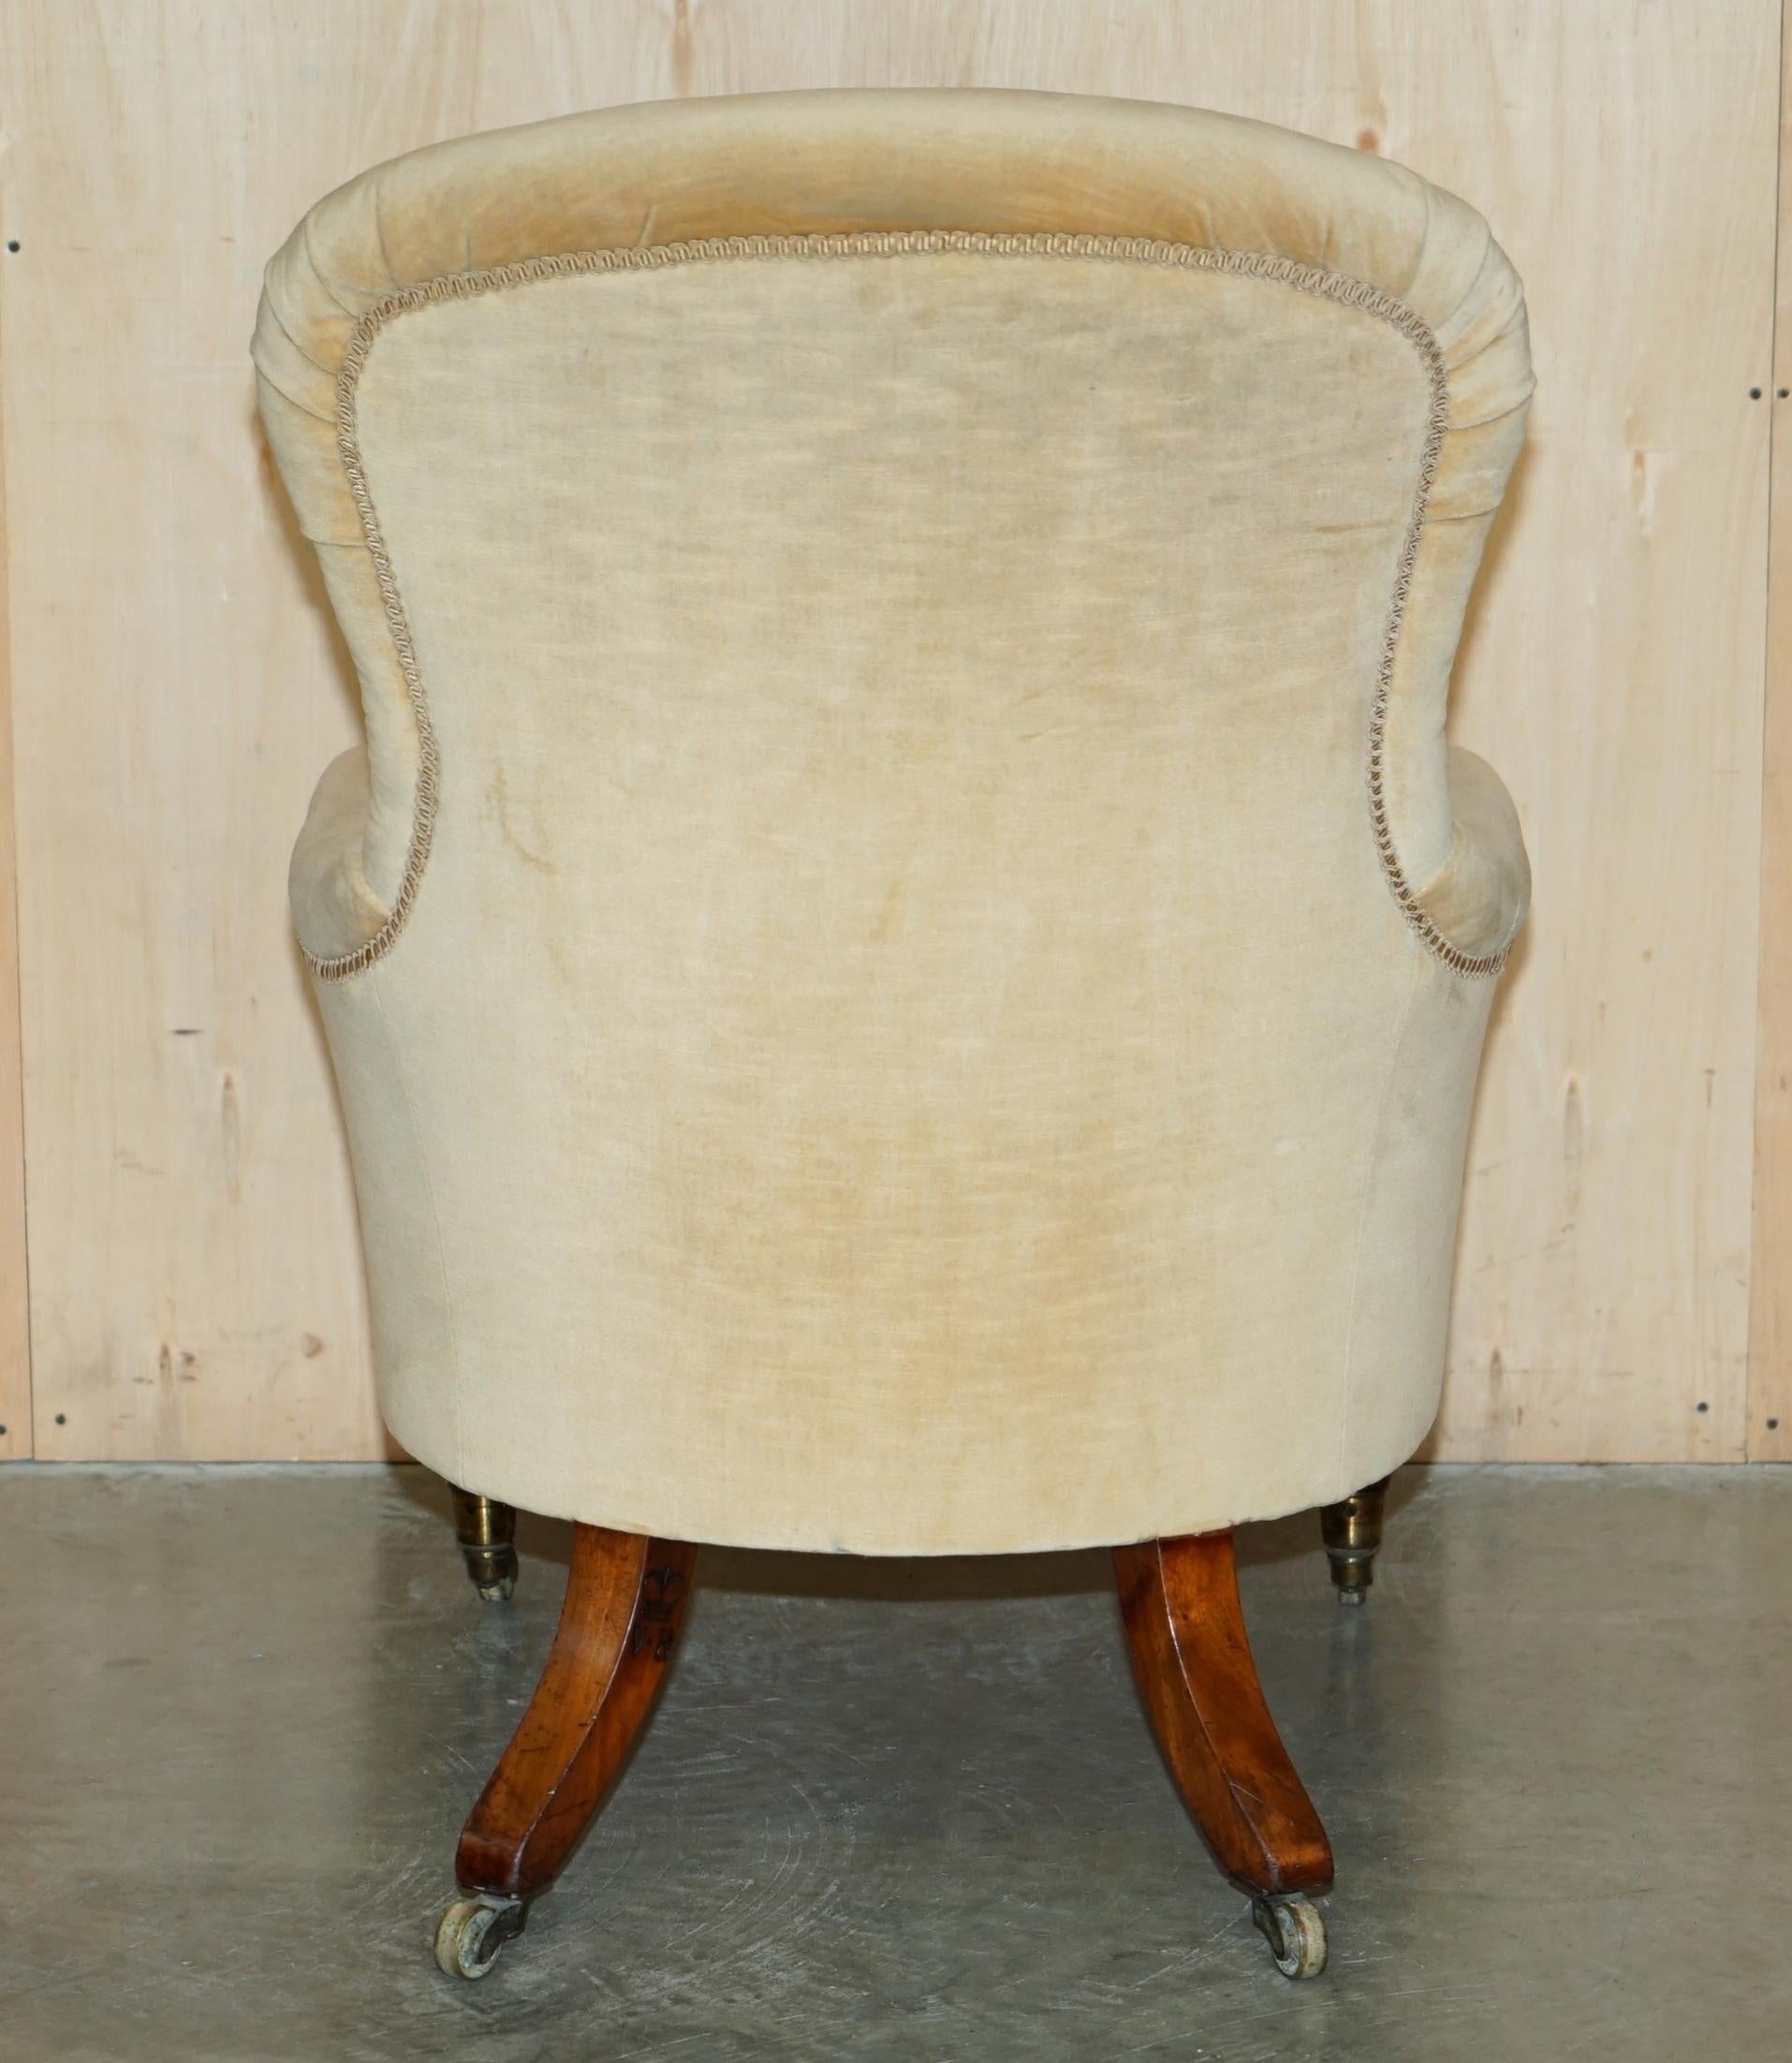 IMPORTANT PAIR OF ROYAL STAMPED JOHNSTONE & JEANES CROWN ESTATE MADE ARMCHAiRS For Sale 9